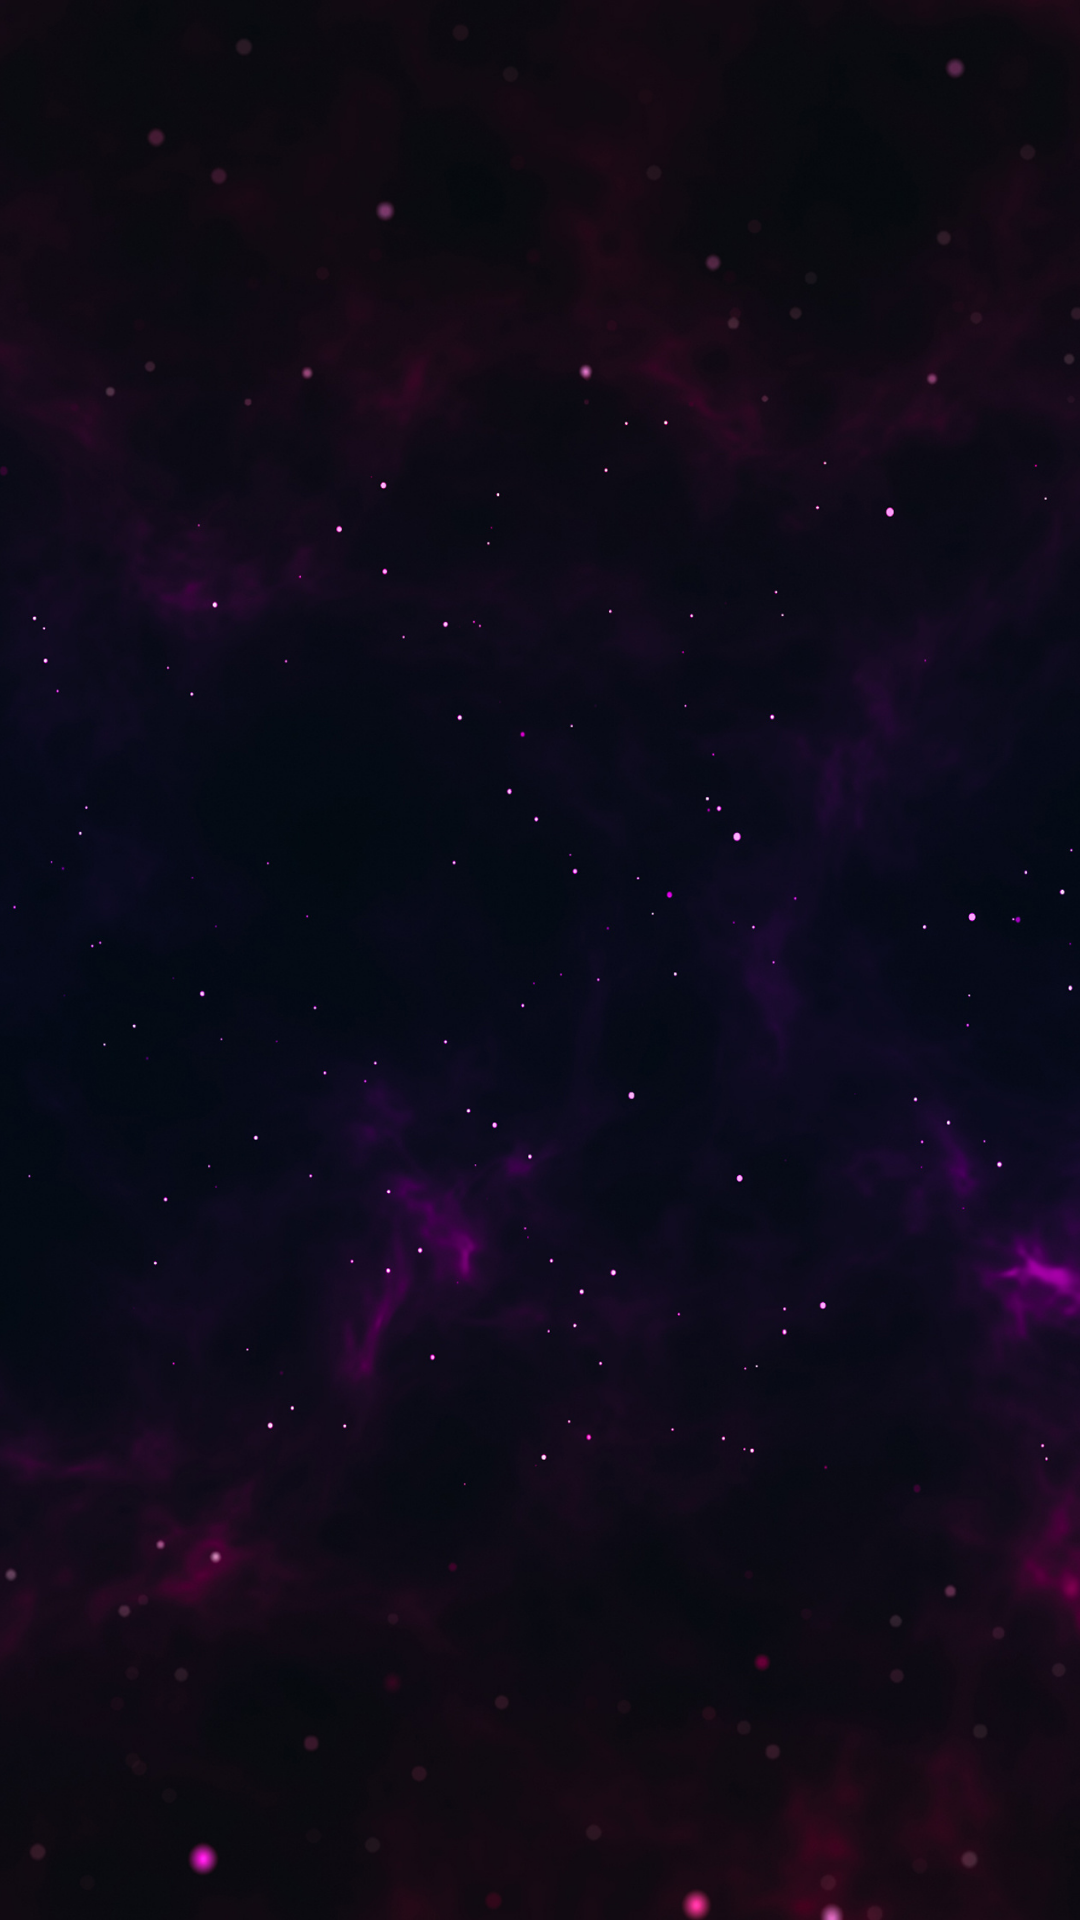 Free Celestial Wallpaper For Your Phone Violet Journal. Purple galaxy wallpaper, Aesthetic galaxy, Galaxy wallpaper